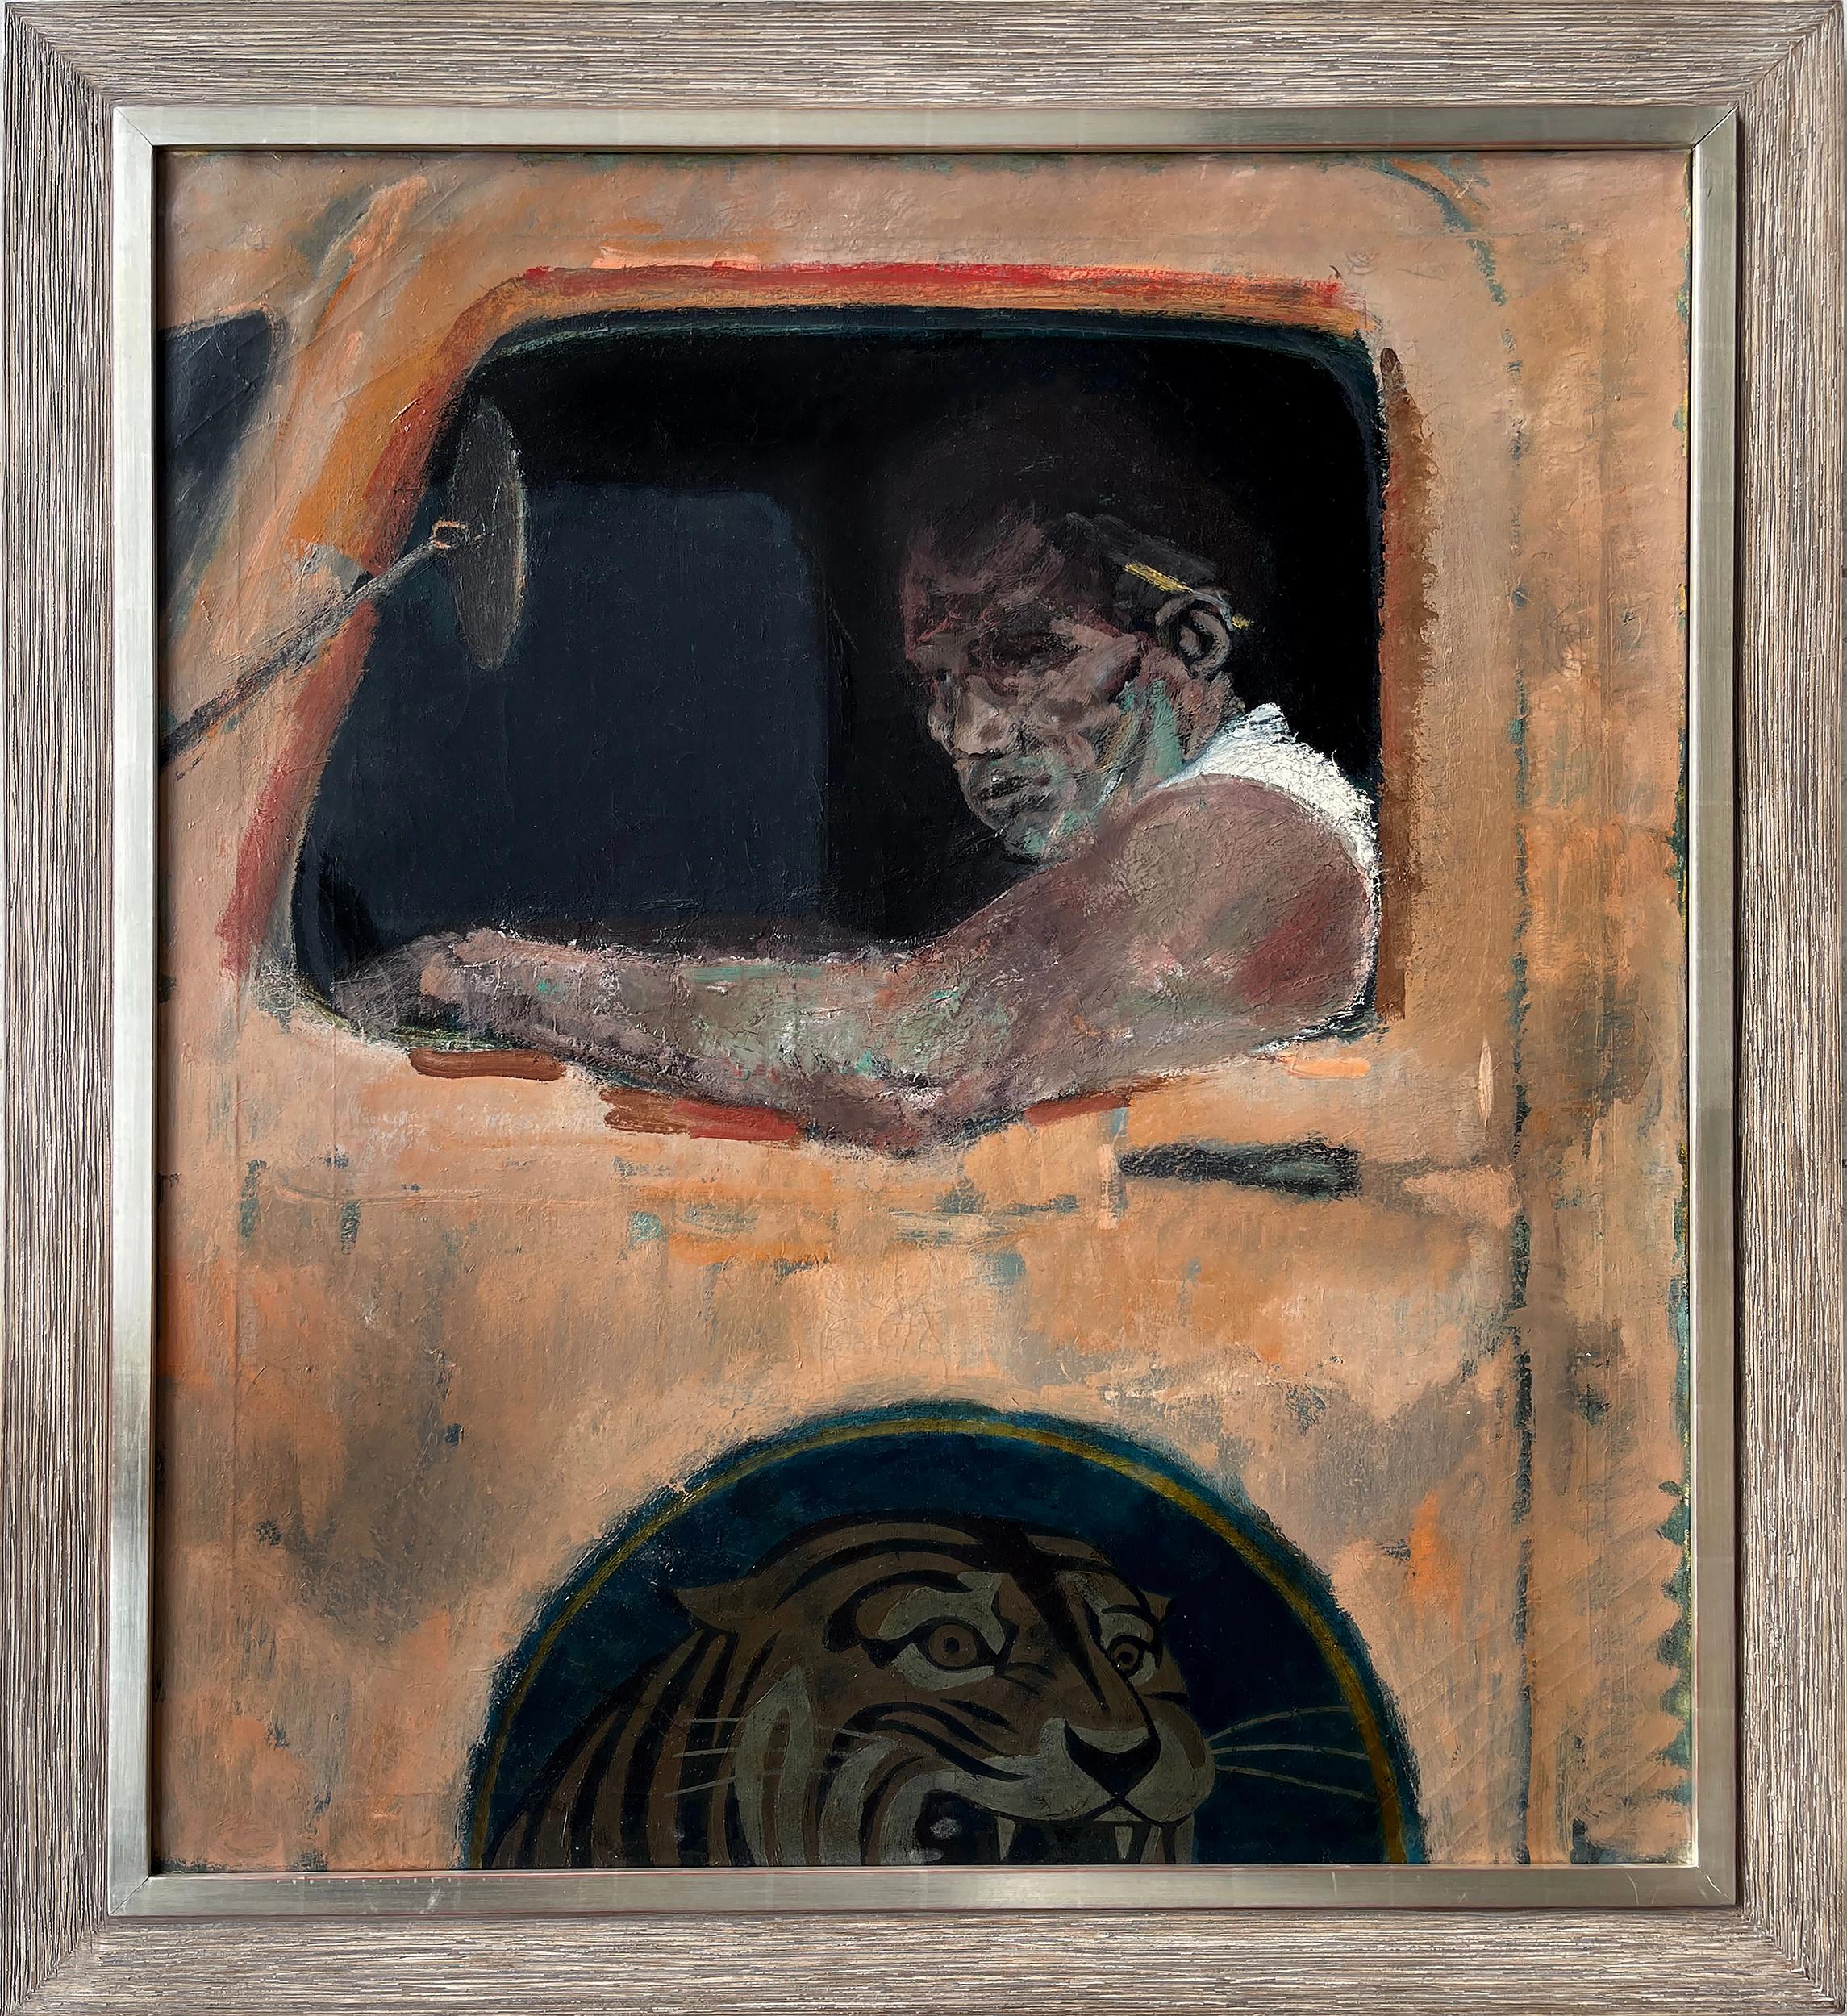 Blue Collar Gritty Truck Driver with Tiger - Color field meets Social Realism  - Color-Field Painting by Joseph Hirsch